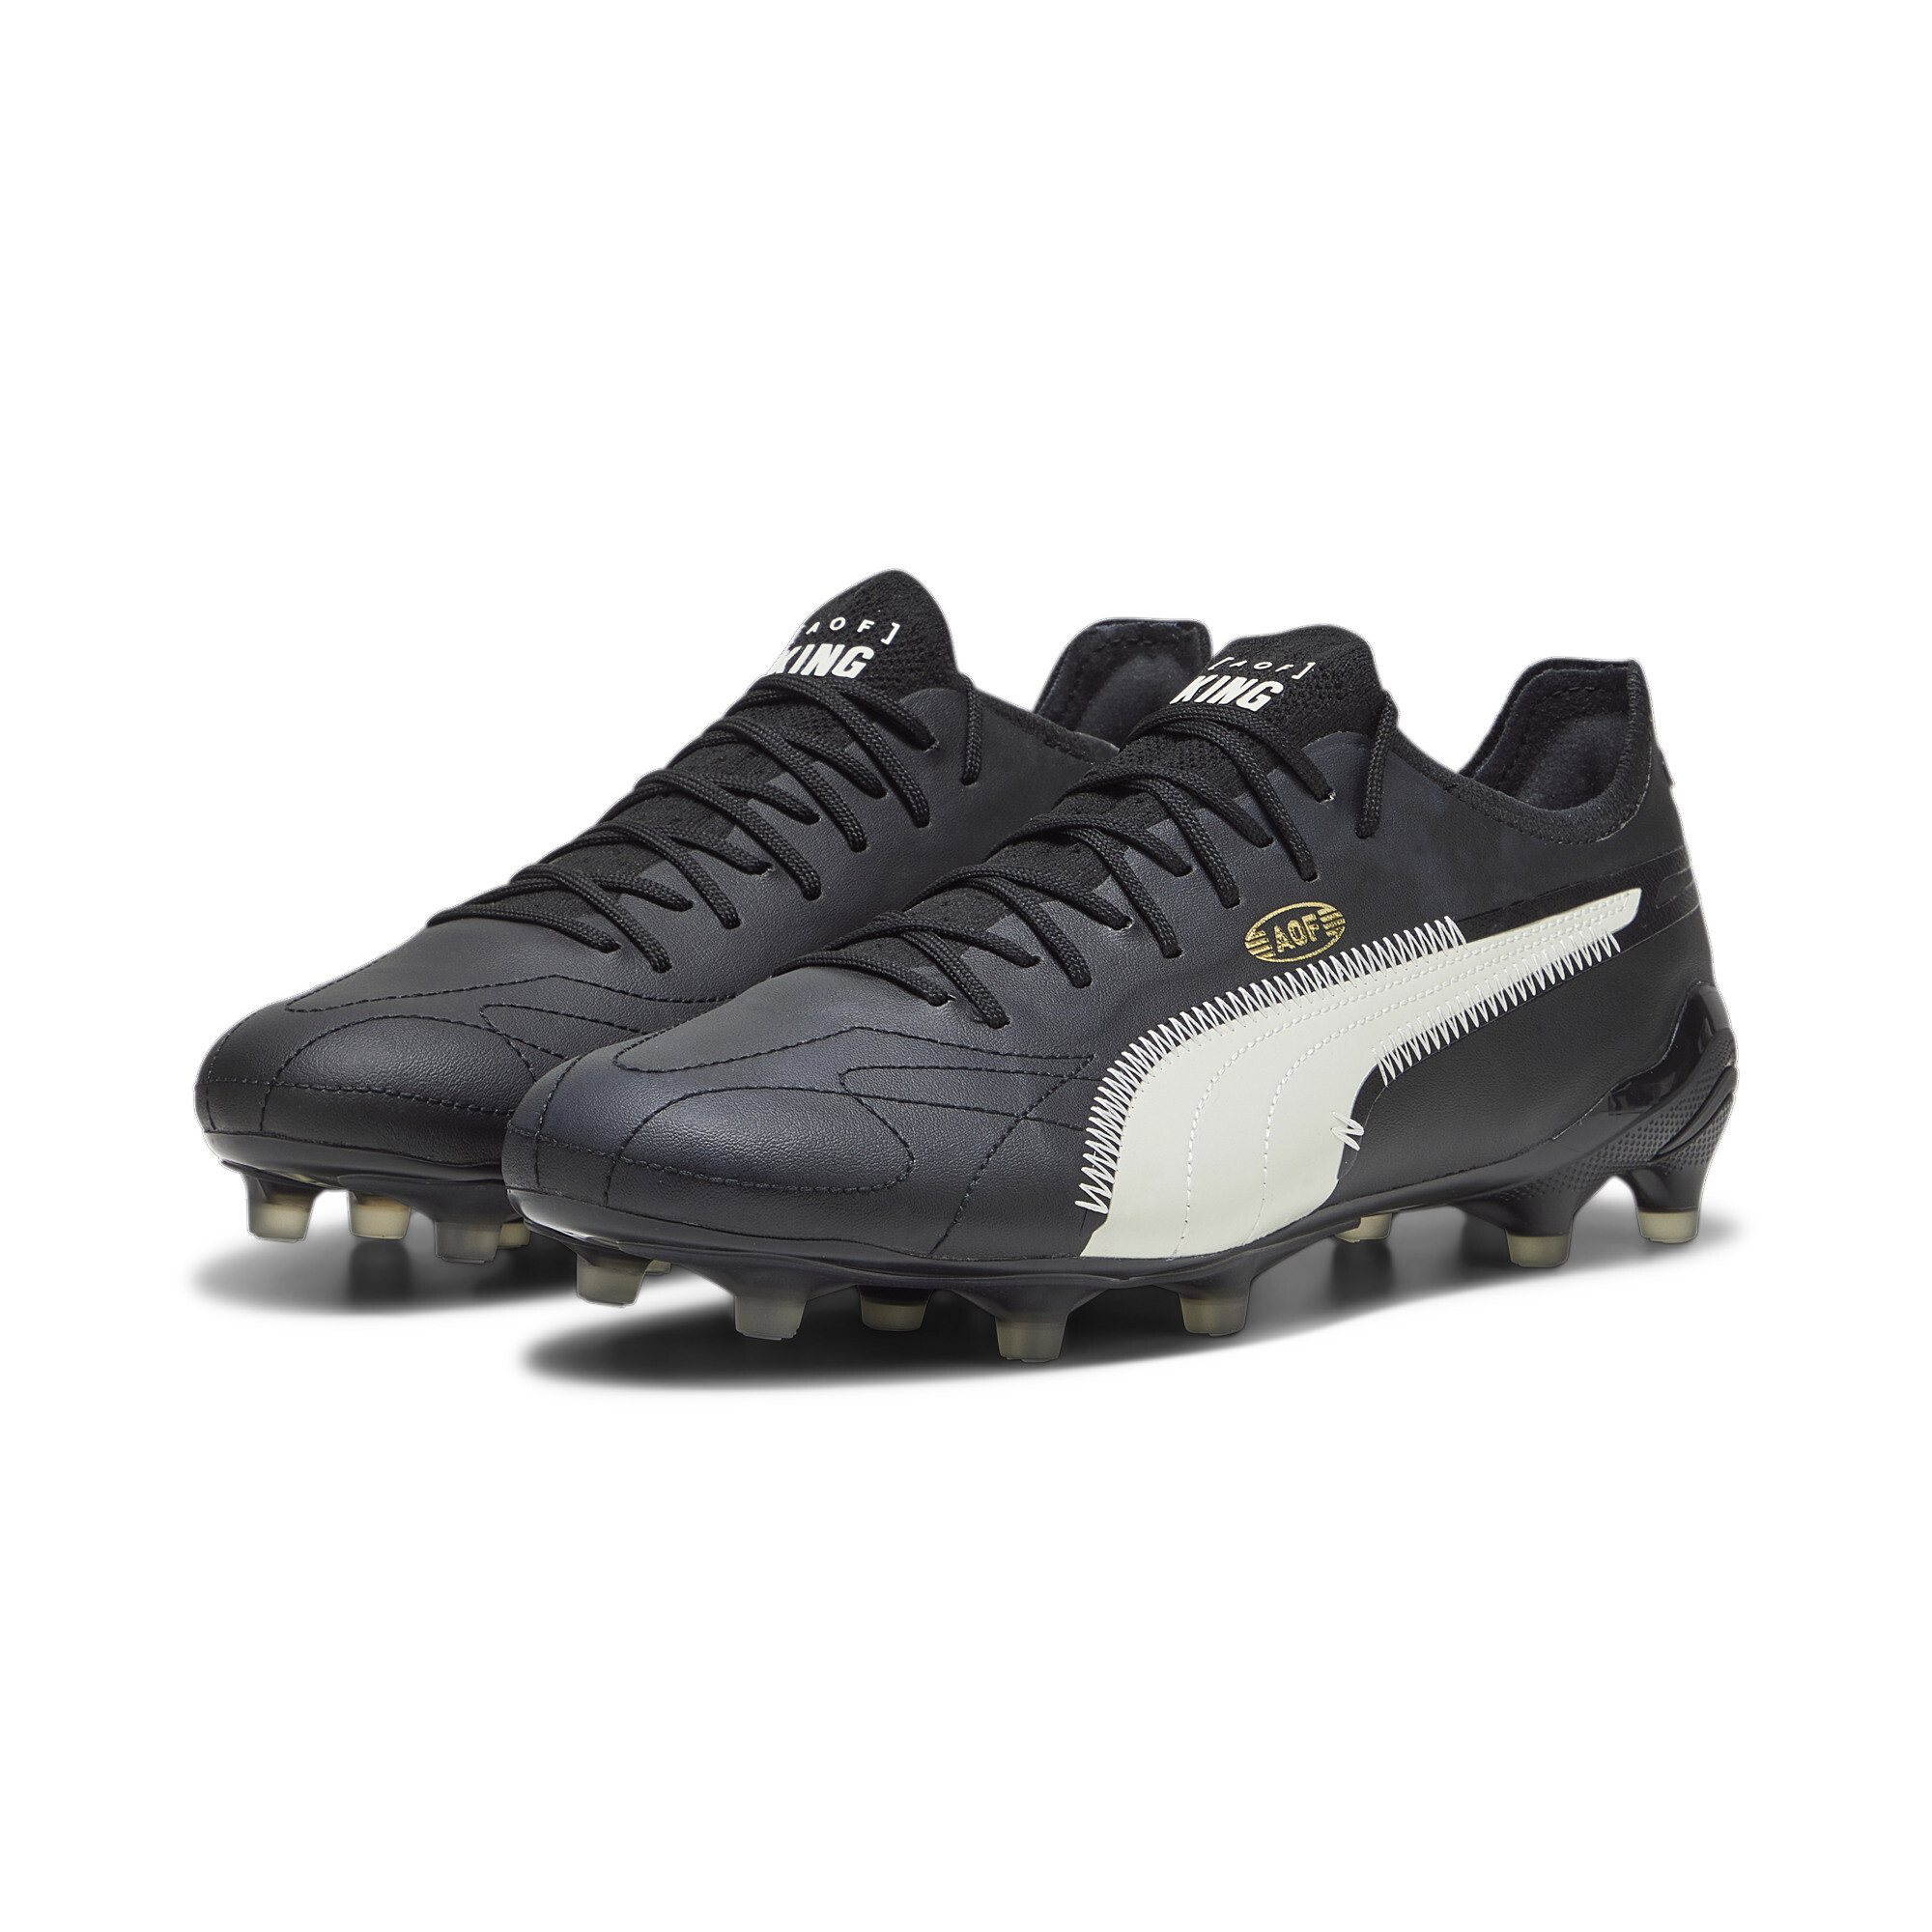 Men's PUMA KING ULTIMATE ART OF FOOTBALL FG/AG Football Boots In Black/Gold, Size EU 41